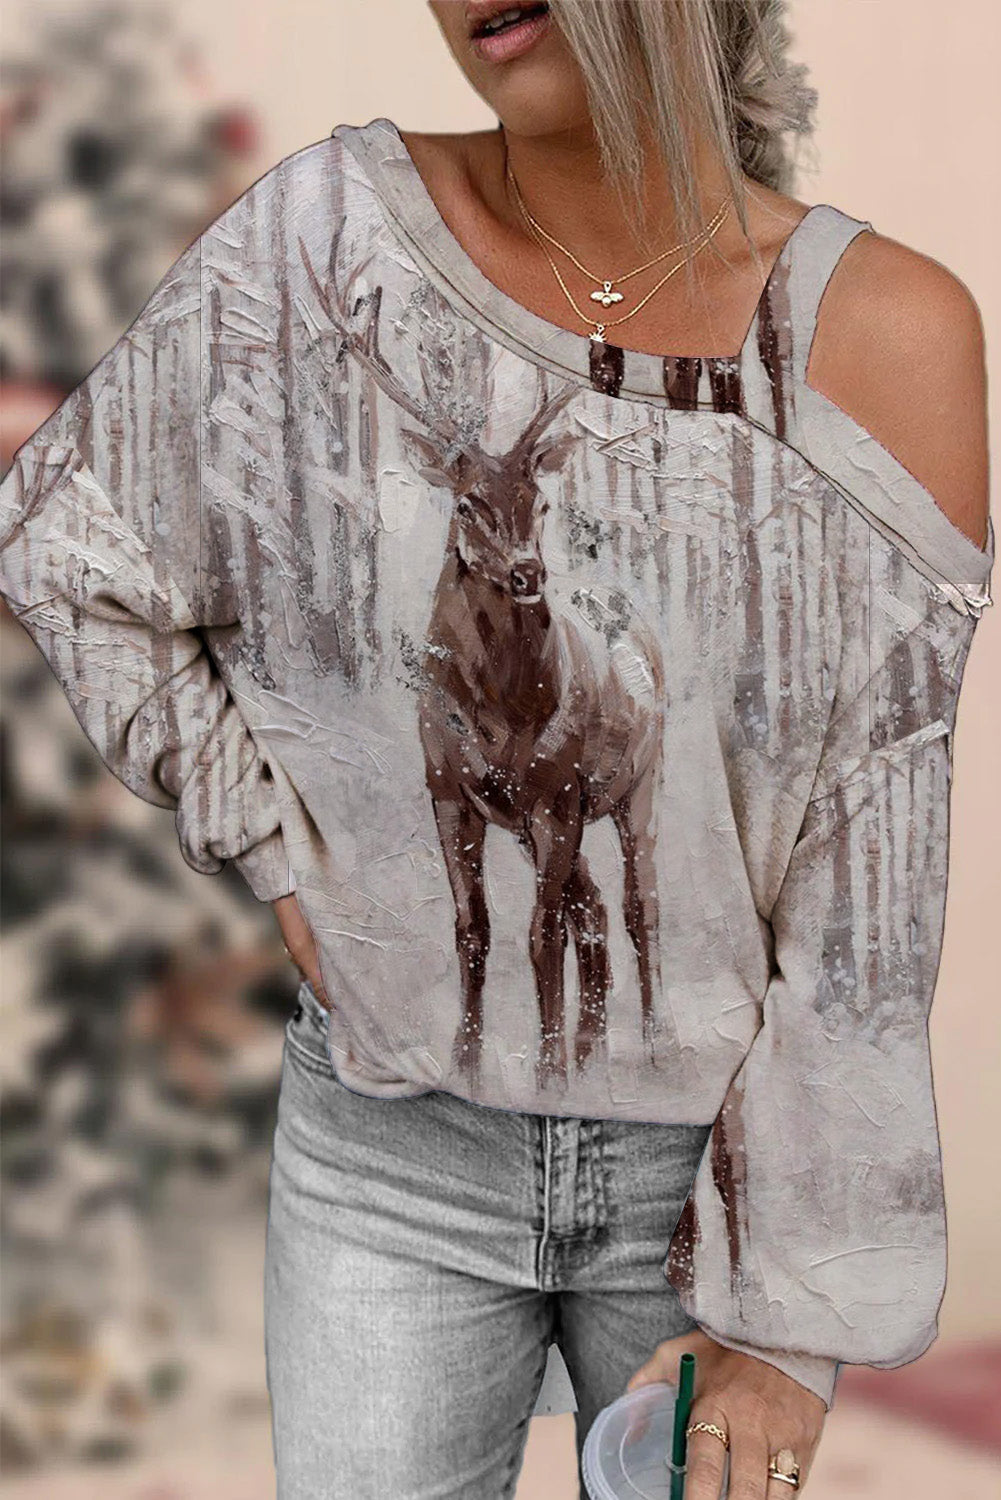 The Deer In The Snow Blouse